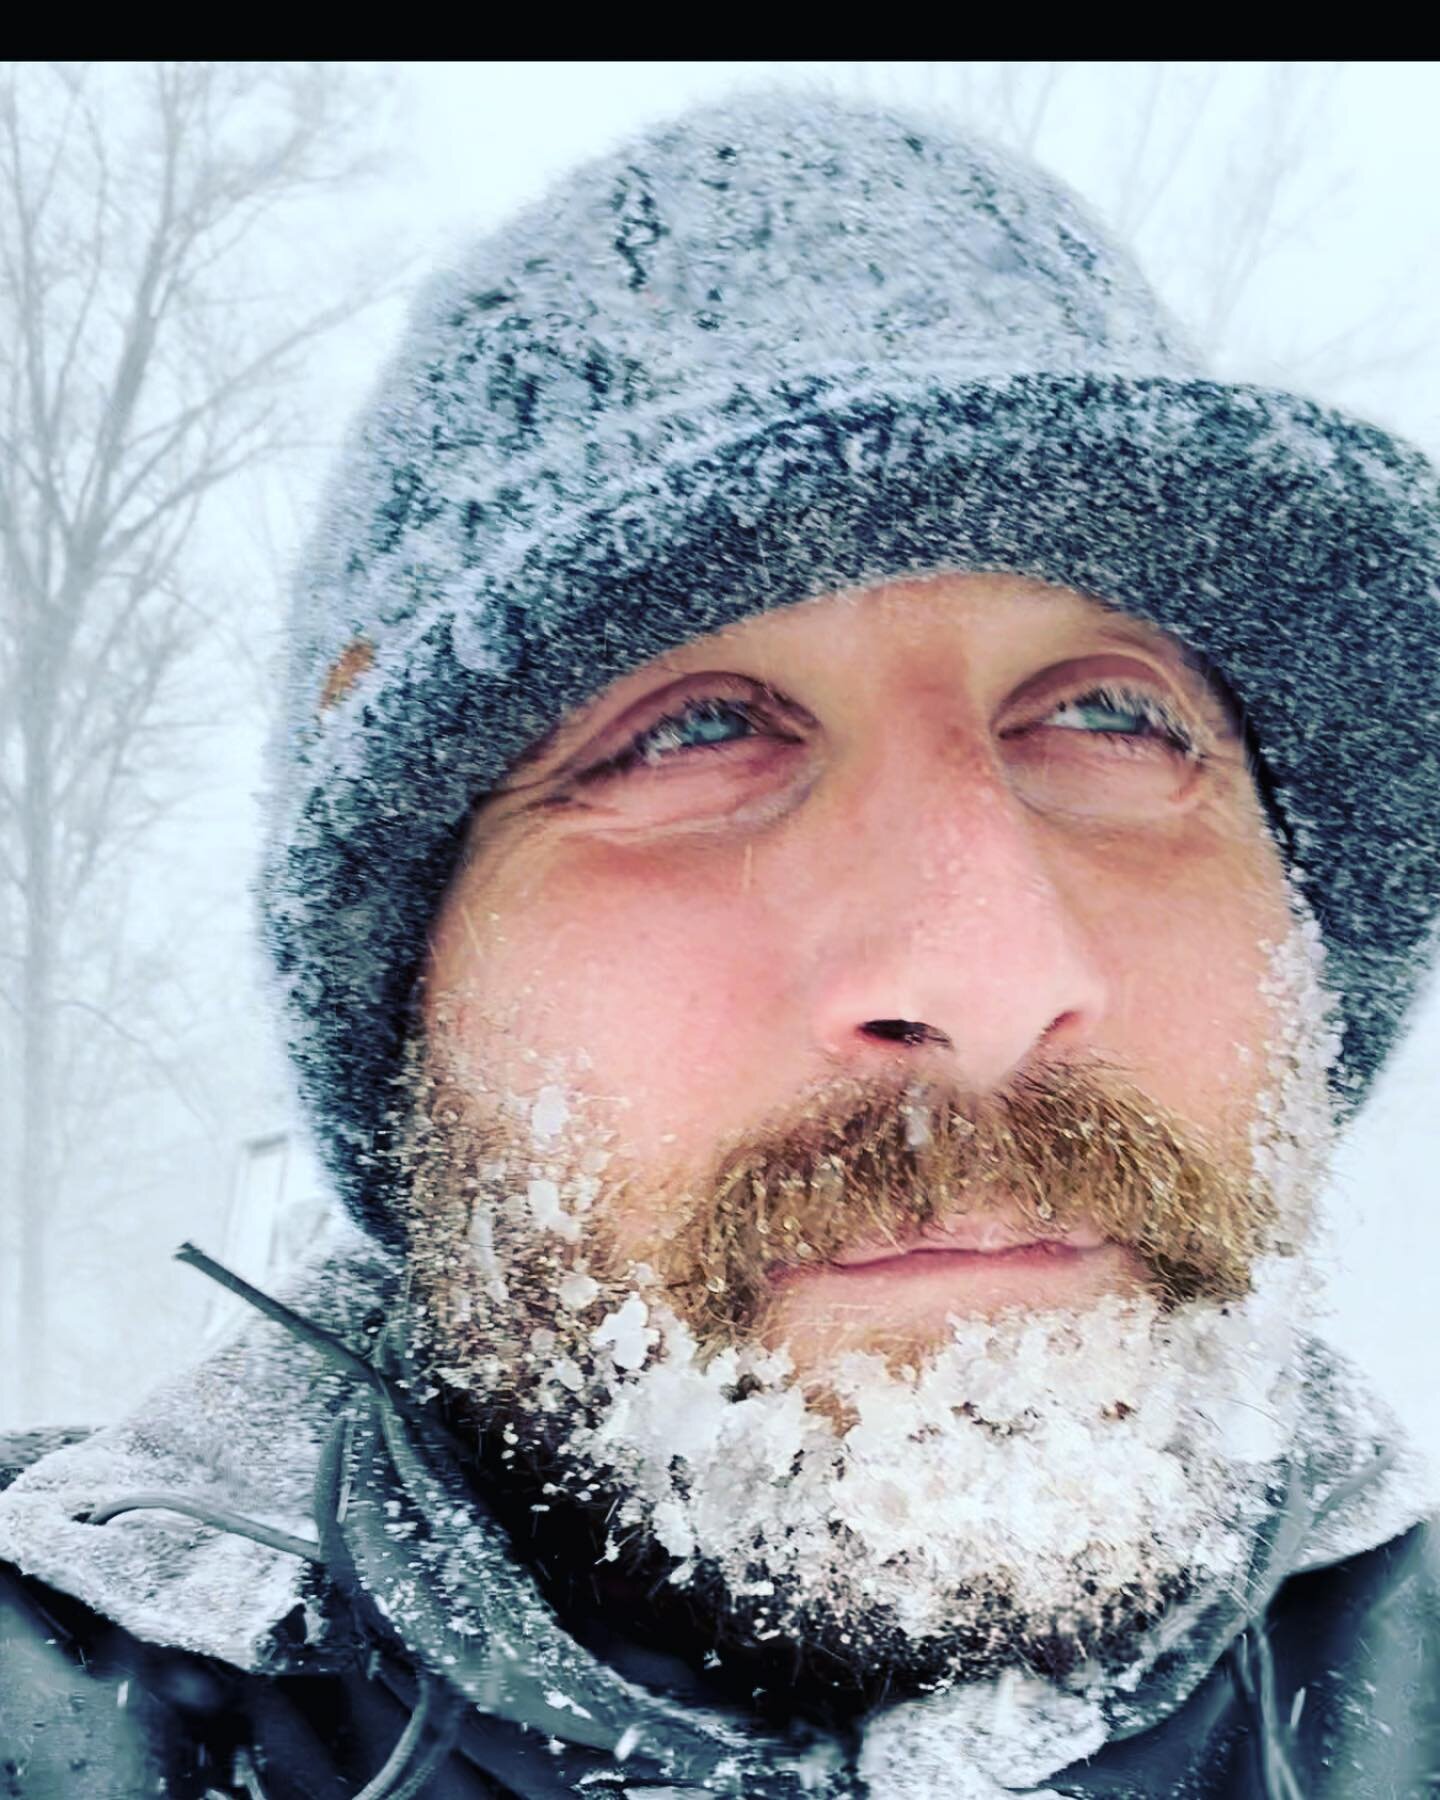 How&rsquo;s your day going? in the snow. in mid March. Mines great. Yesterday was 60 and sunny.&hellip;check out my stories and see why I look like the abominable snowman. 
.
.
.
#oiltanksweeppremier#oiltanksweep#tanksweep#undergroundtanksweep#oiltan